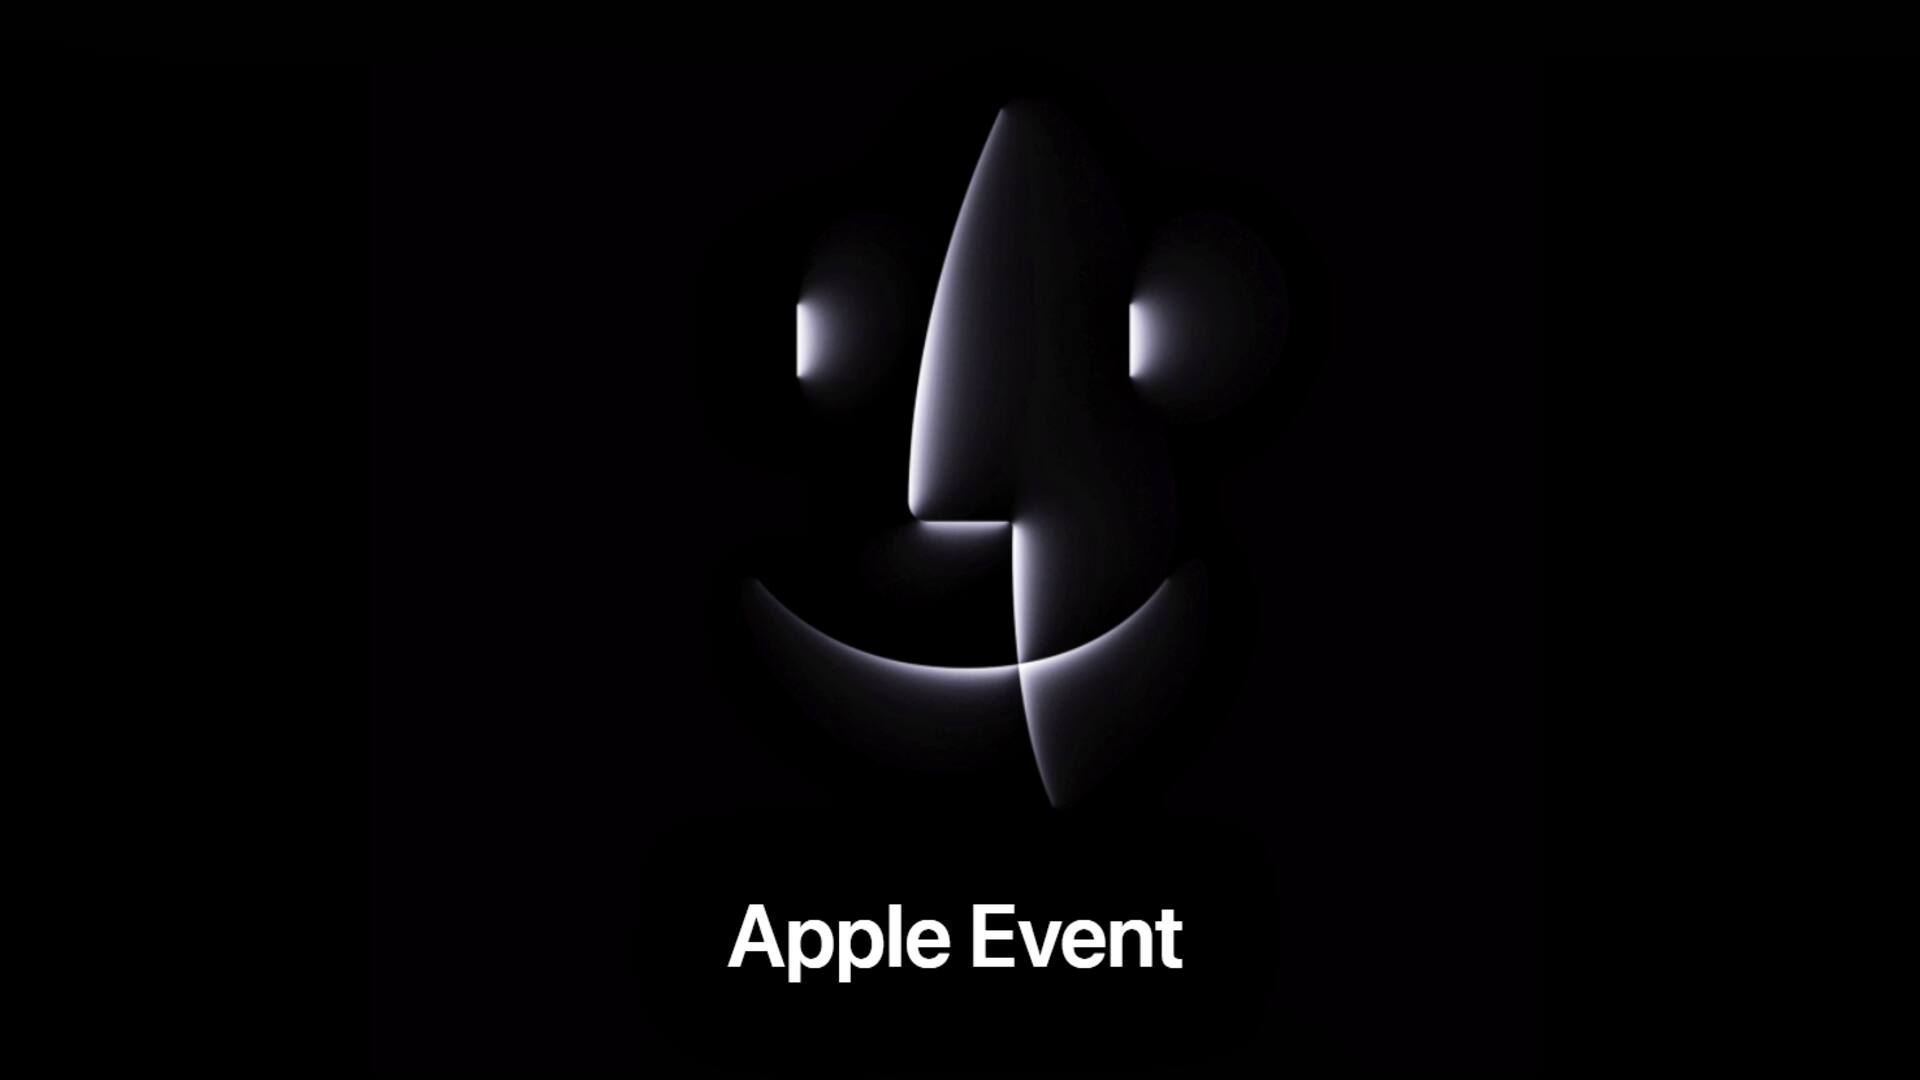 Apple's 'Scary Fast' event next week: What to expect